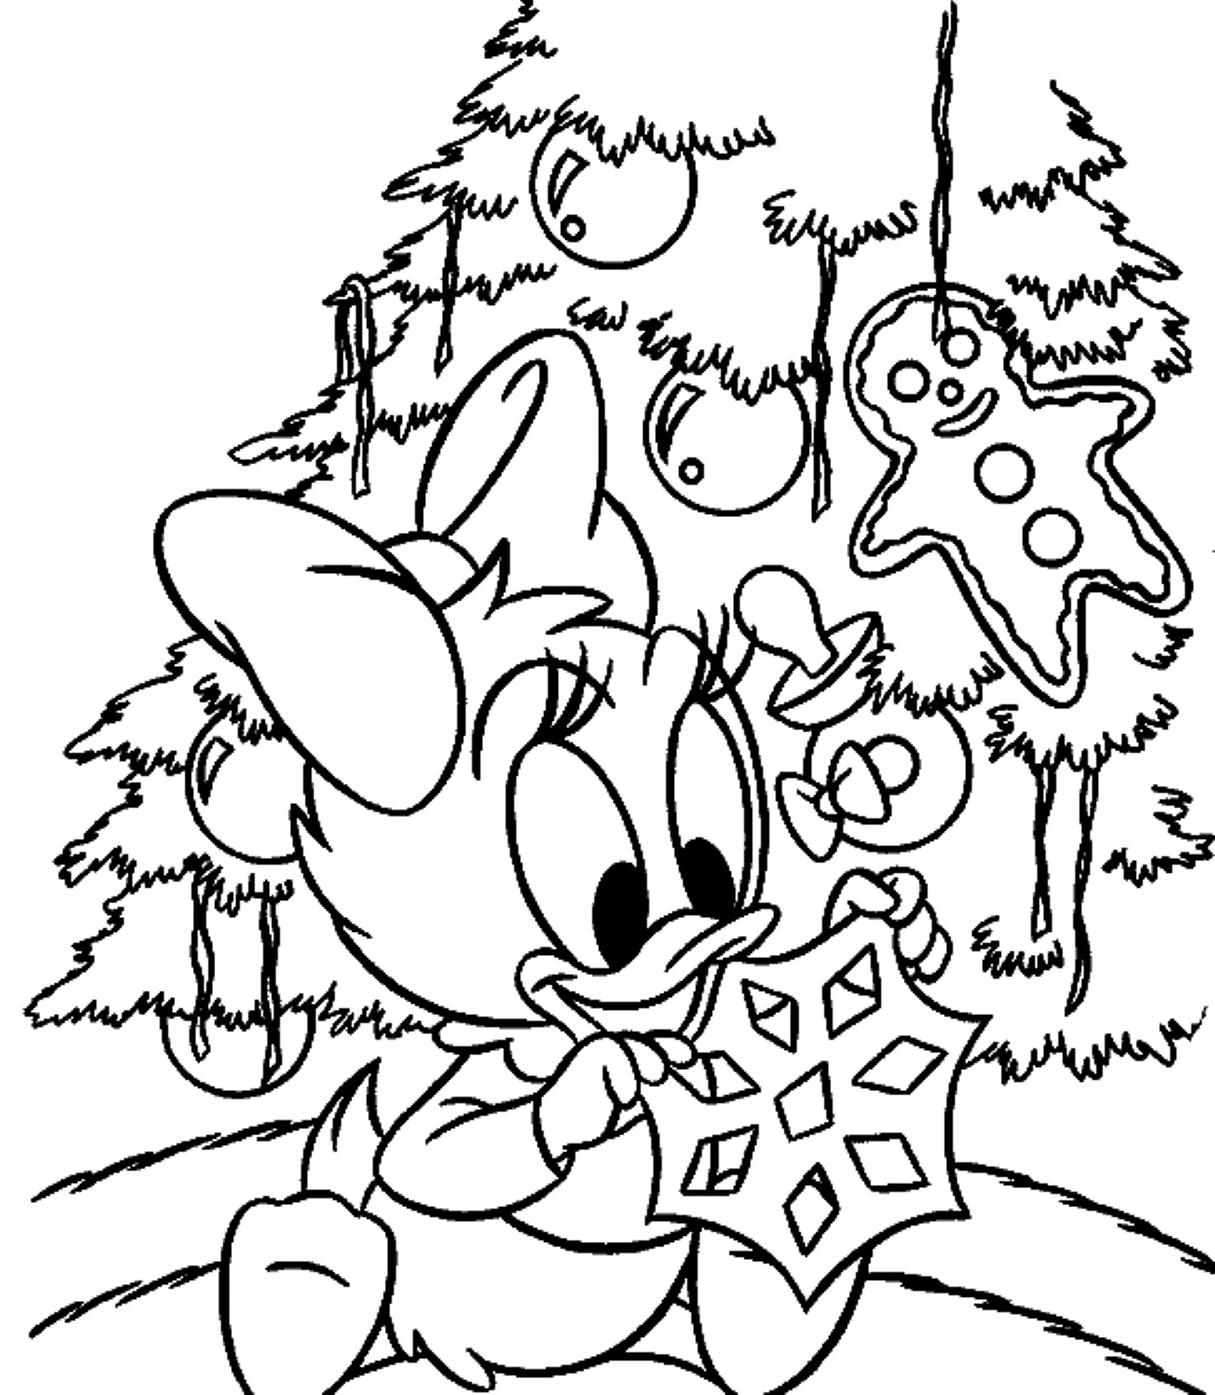 Disney Christmas Coloring Pages
 Disney Christmas Coloring Pages For Kids Printable